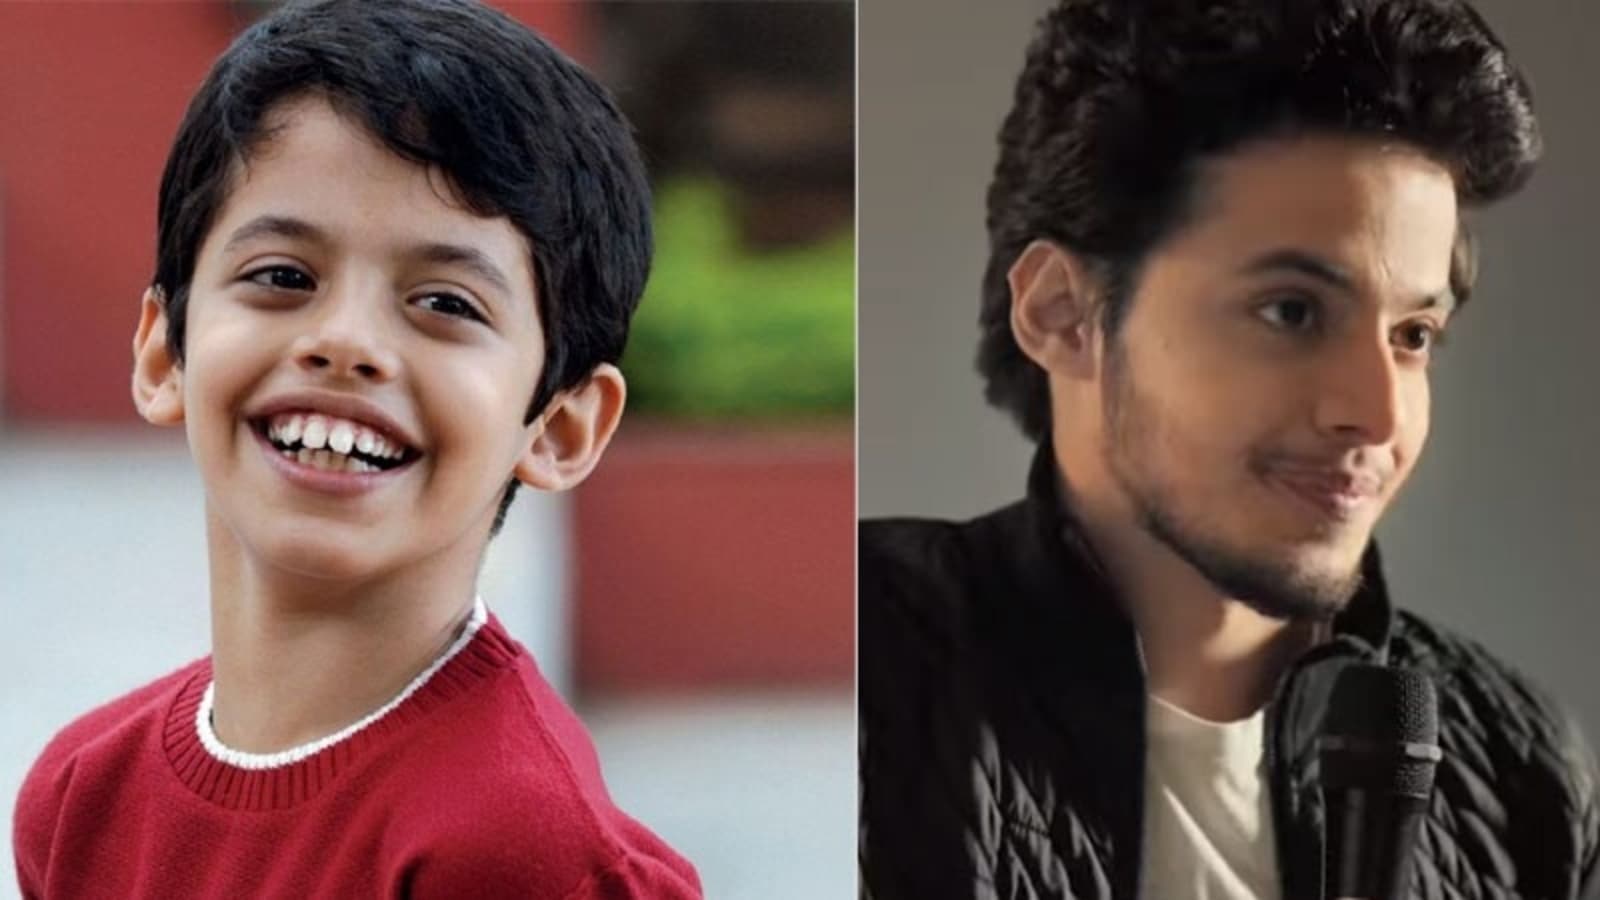 Taare Zameen Par’s Darsheel Safary makes a comeback with emotional Netflix video, fans say seeing him is ‘so nostalgic’